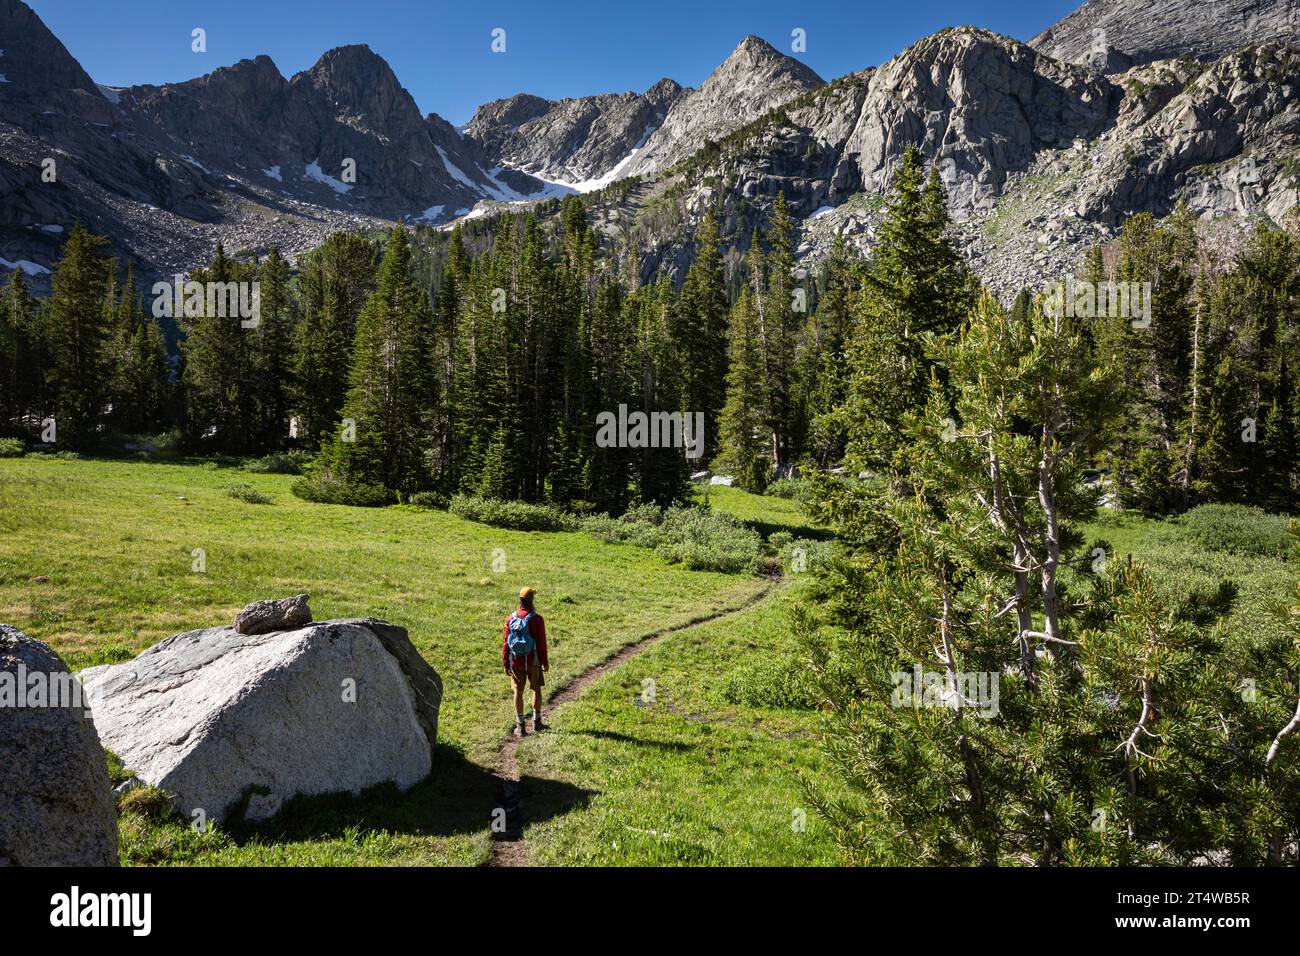 WY05555-00...WYOMING - Hiker on the Lonesome Lake Trail in the Cirque of the Towers, Popo Agie Wilderness area of the Wind River Range. Stock Photo